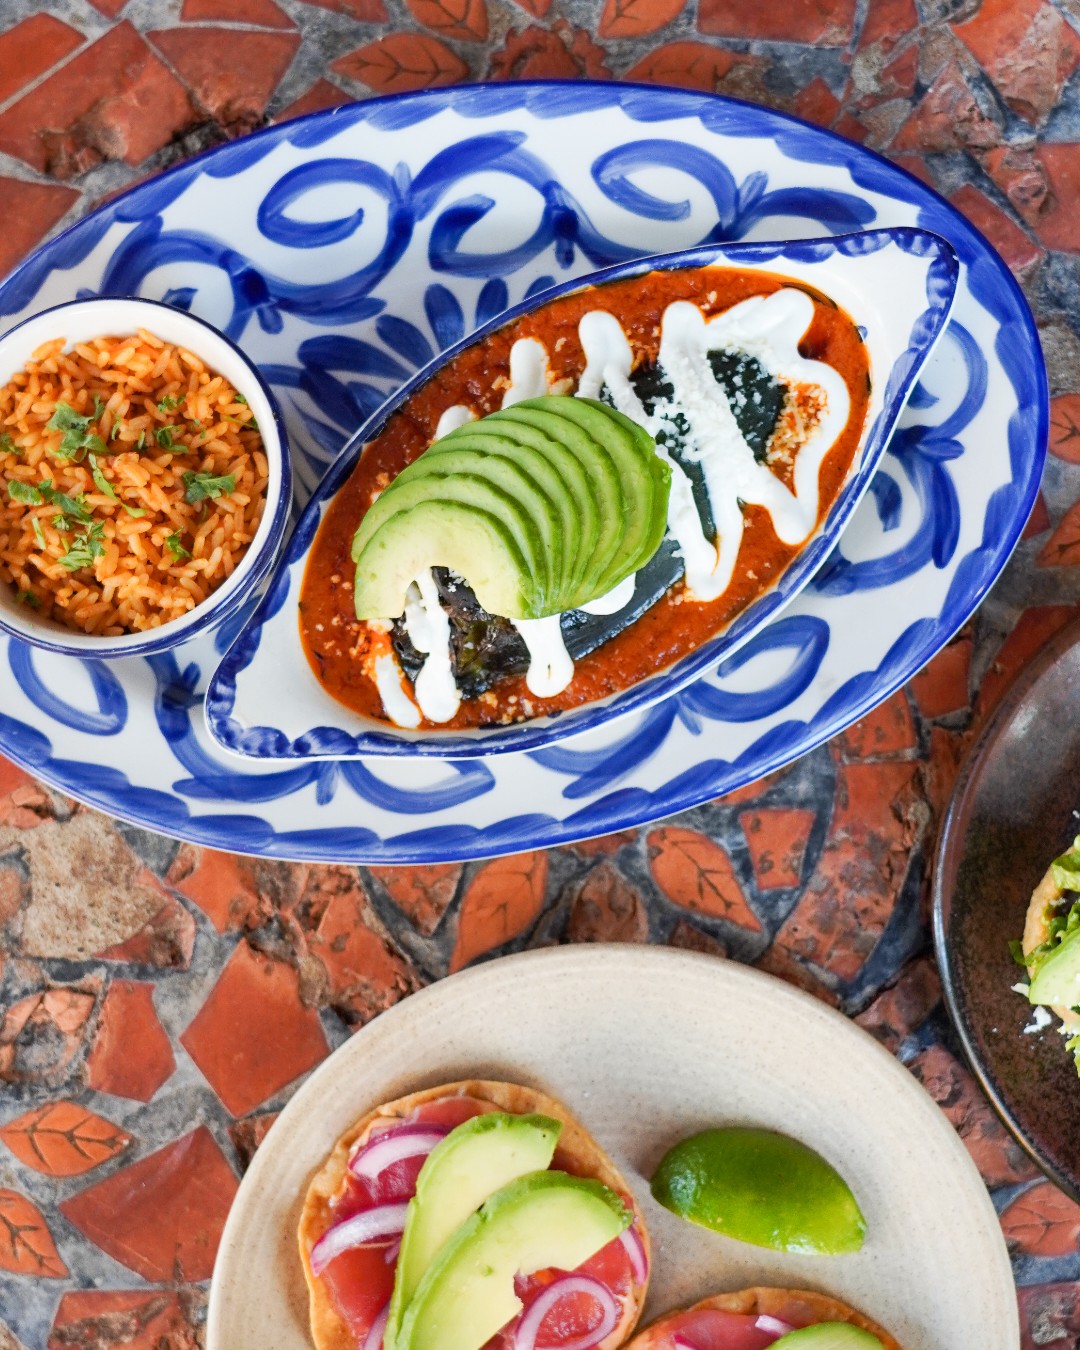 Flores Mexican Restaurant Is Launching a New Location in Emeryville